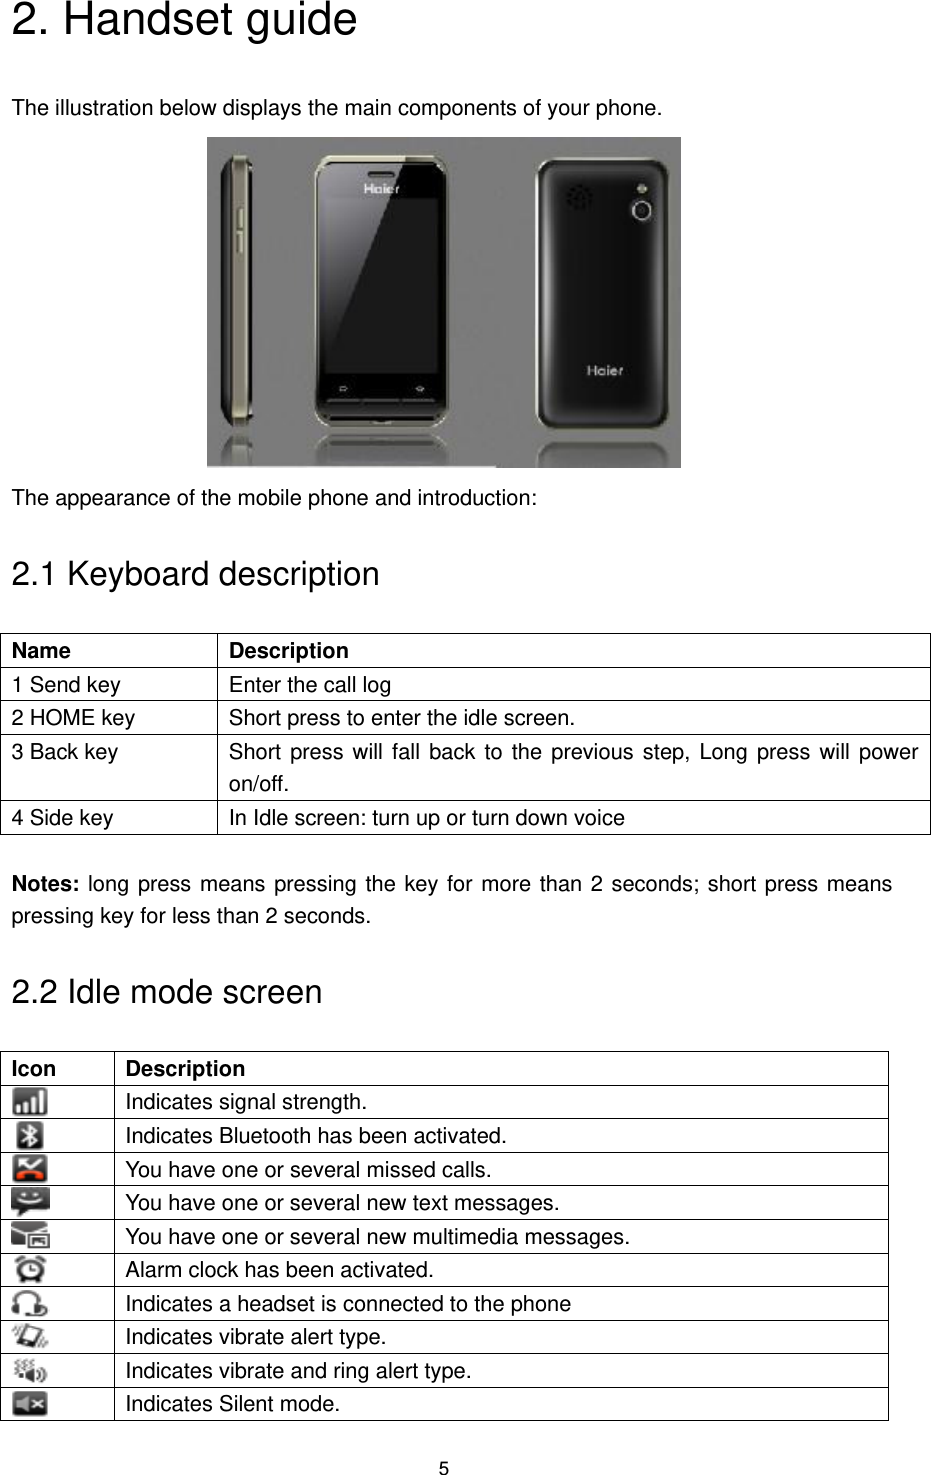 5 2. Handset guide The illustration below displays the main components of your phone.  The appearance of the mobile phone and introduction: 2.1 Keyboard description Name   Description   1 Send key   Enter the call log 2 HOME key   Short press to enter the idle screen. 3 Back key Short press will  fall back to  the previous step, Long press will power on/off. 4 Side key In Idle screen: turn up or turn down voice  Notes: long press means pressing the key for more than 2 seconds; short press means pressing key for less than 2 seconds. 2.2 Idle mode screen Icon   Description    Indicates signal strength.  Indicates Bluetooth has been activated.  You have one or several missed calls.  You have one or several new text messages.  You have one or several new multimedia messages.  Alarm clock has been activated.  Indicates a headset is connected to the phone  Indicates vibrate alert type.  Indicates vibrate and ring alert type.  Indicates Silent mode. 